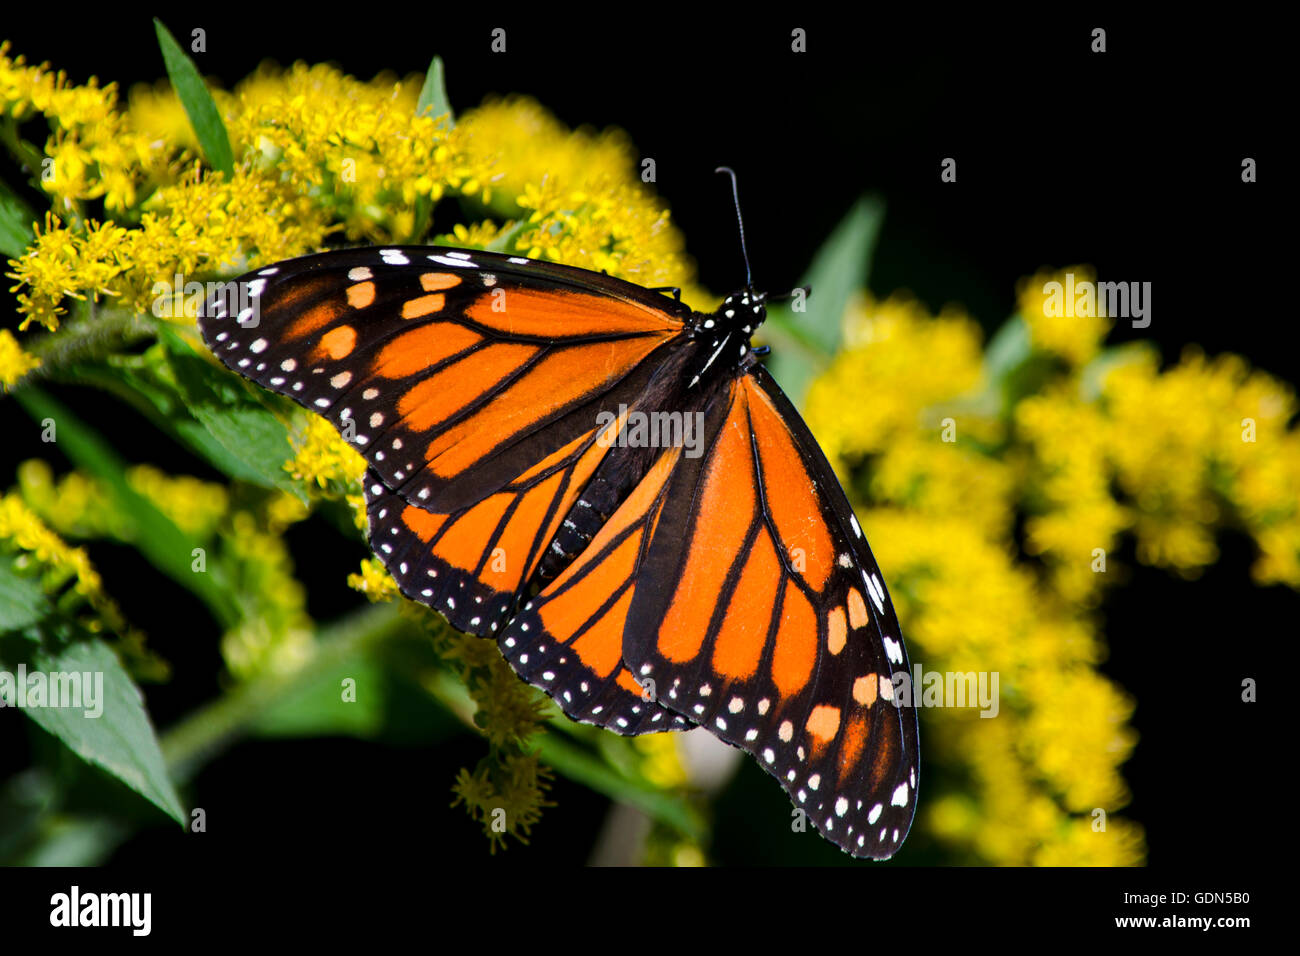 Monarch butterfly feeding on goldenrod flowers up close Stock Photo